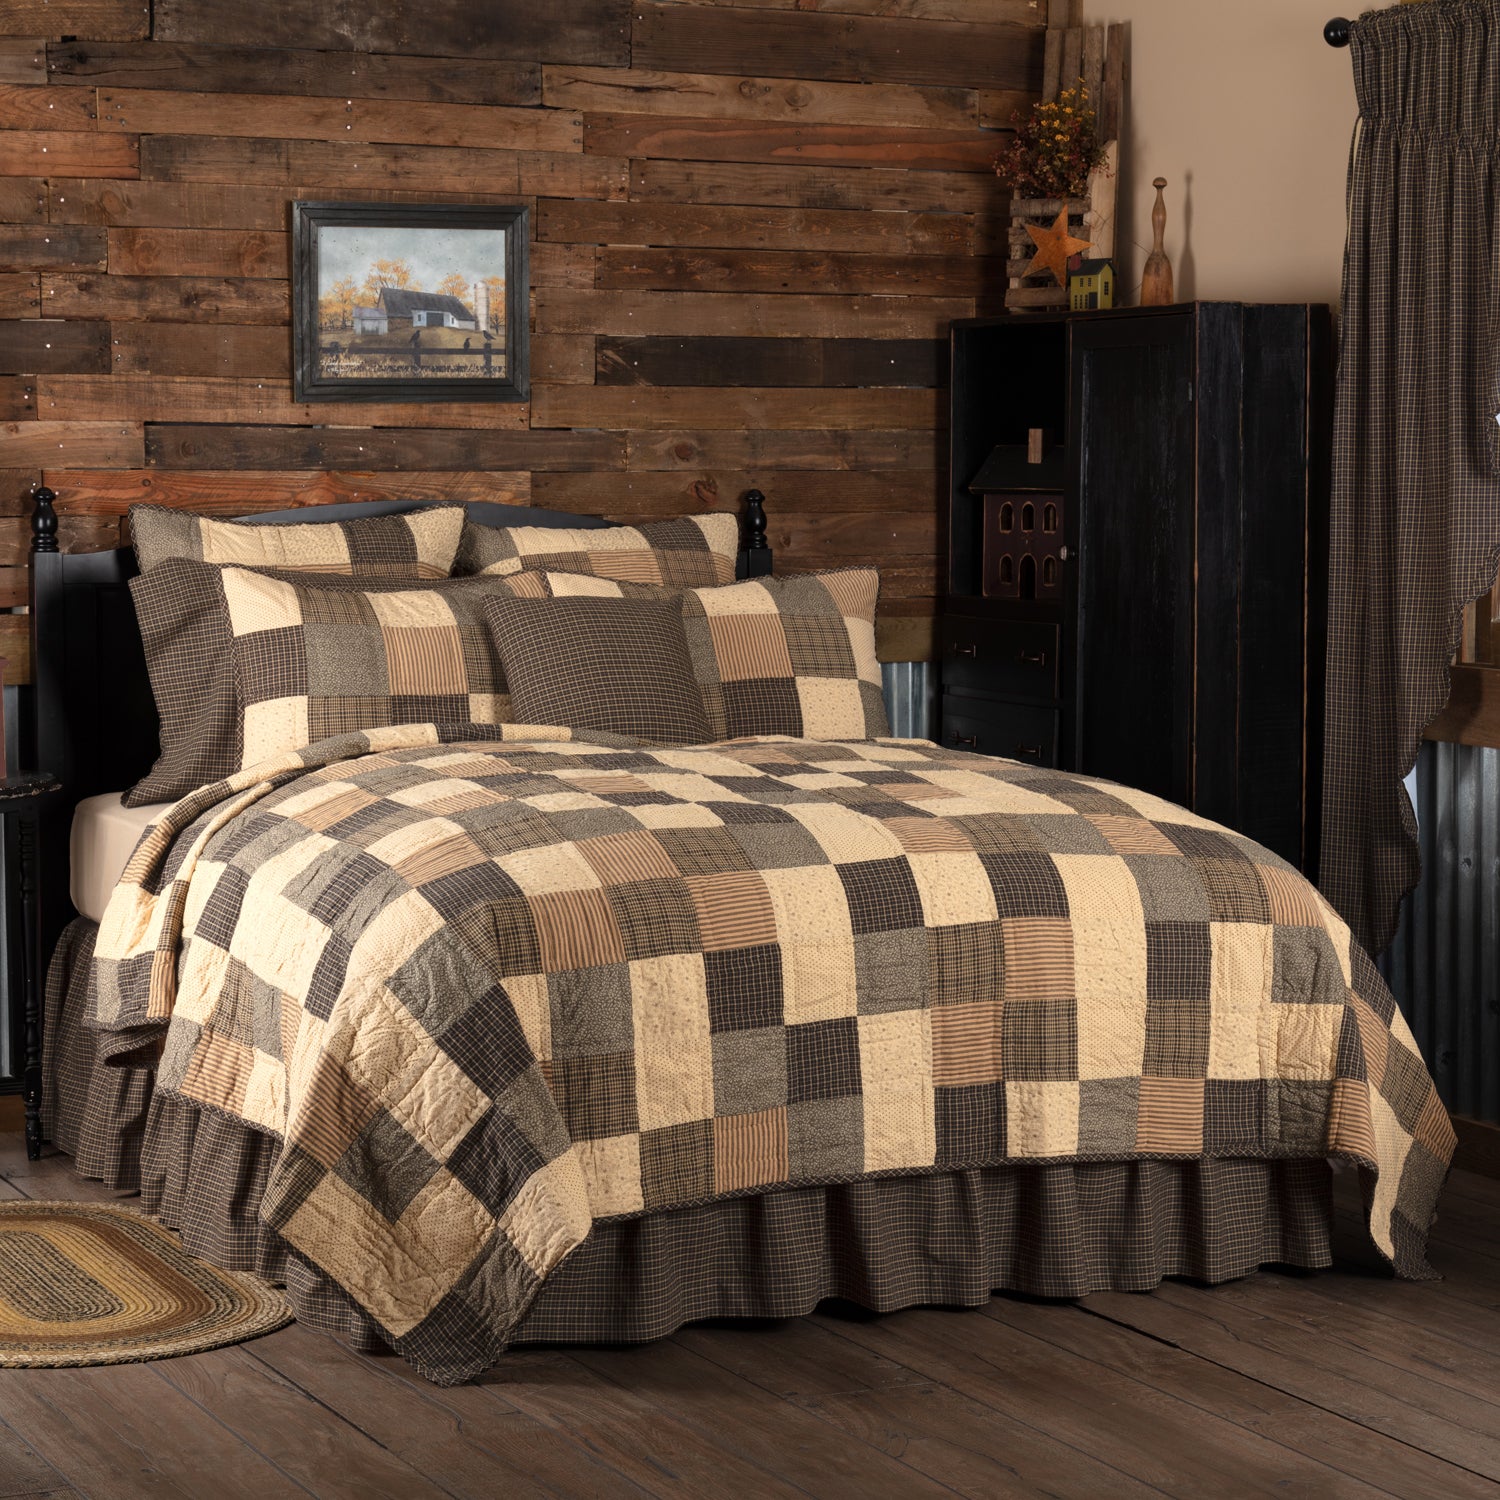 10145-Kettle-Grove-King-Quilt-110Wx97L-image-5